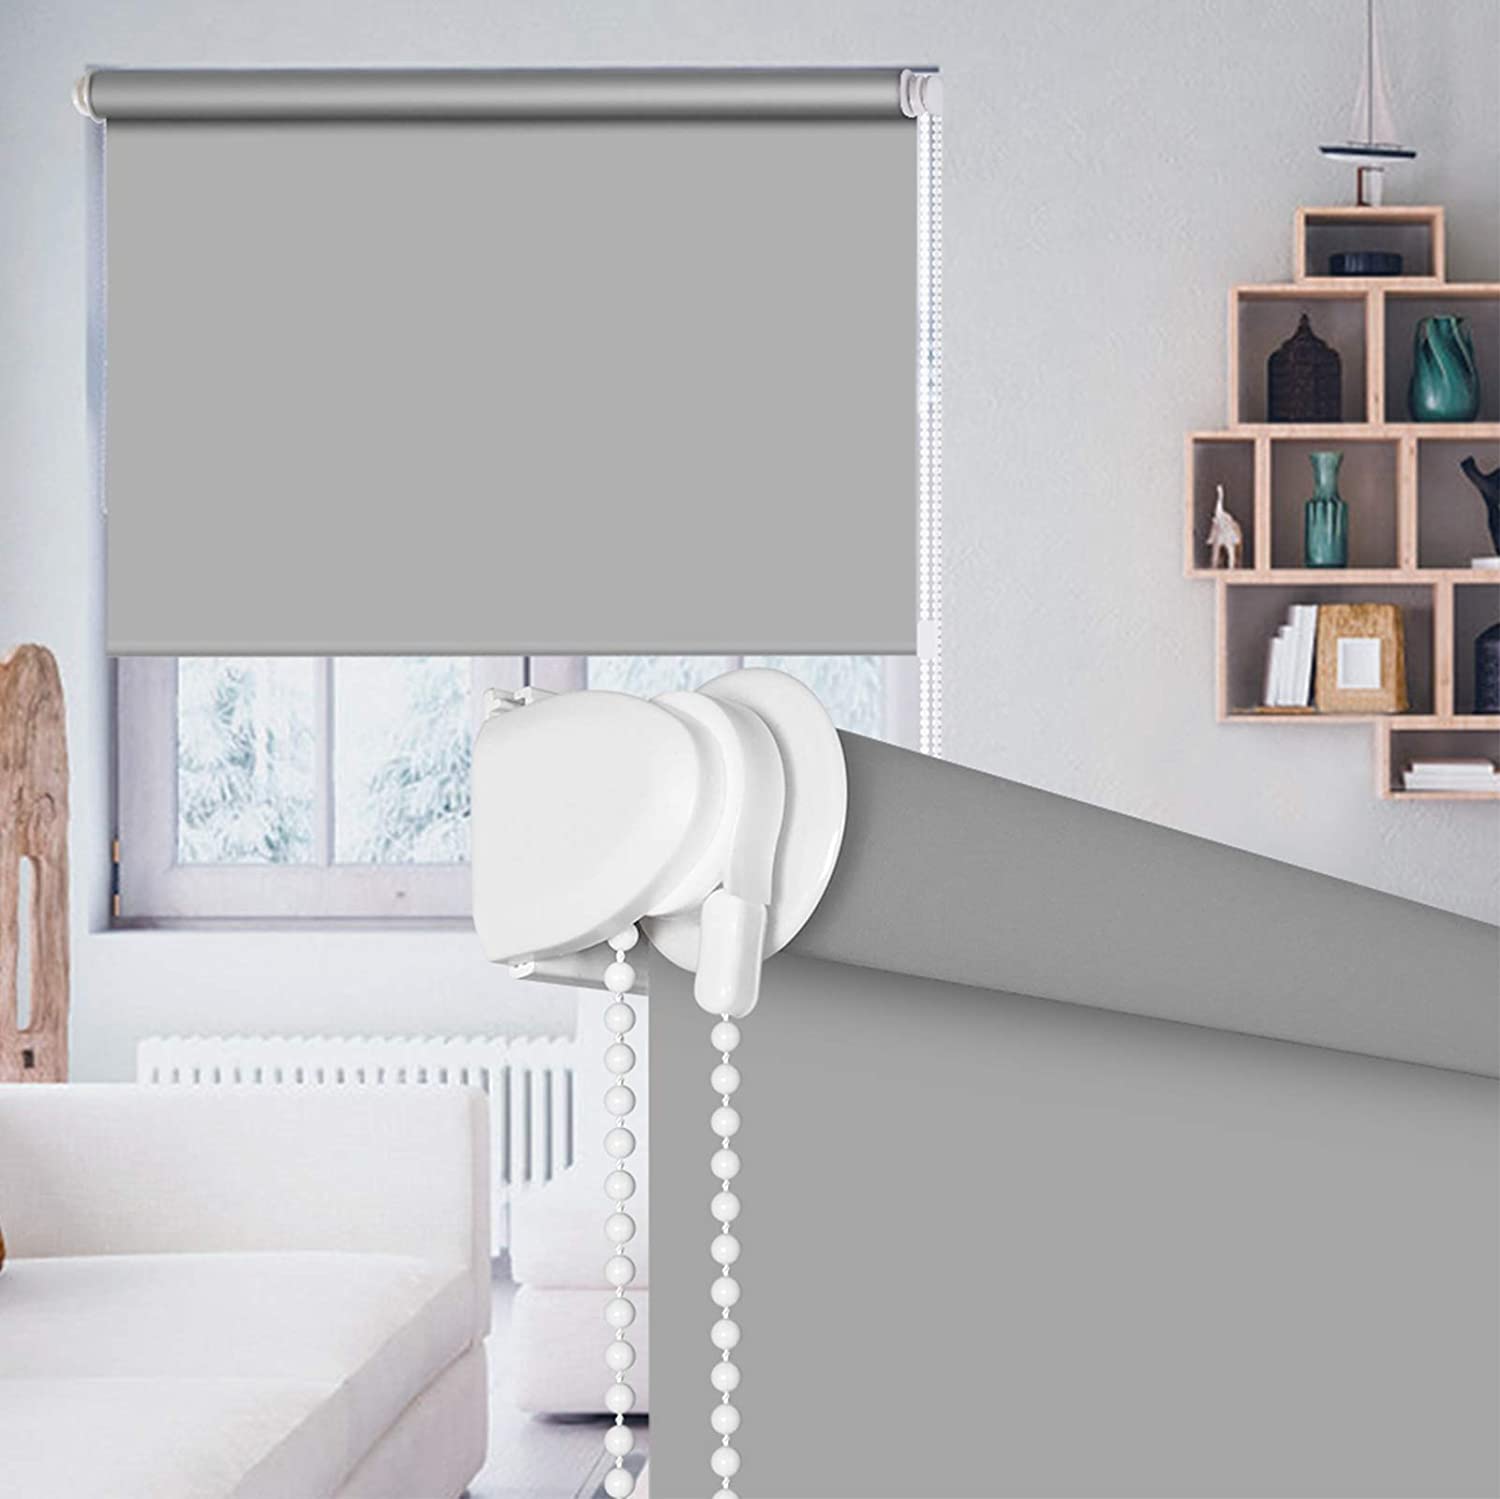 Blackout Waterproof Fabric Window Roller Shades Blind. - GREY - e4cents